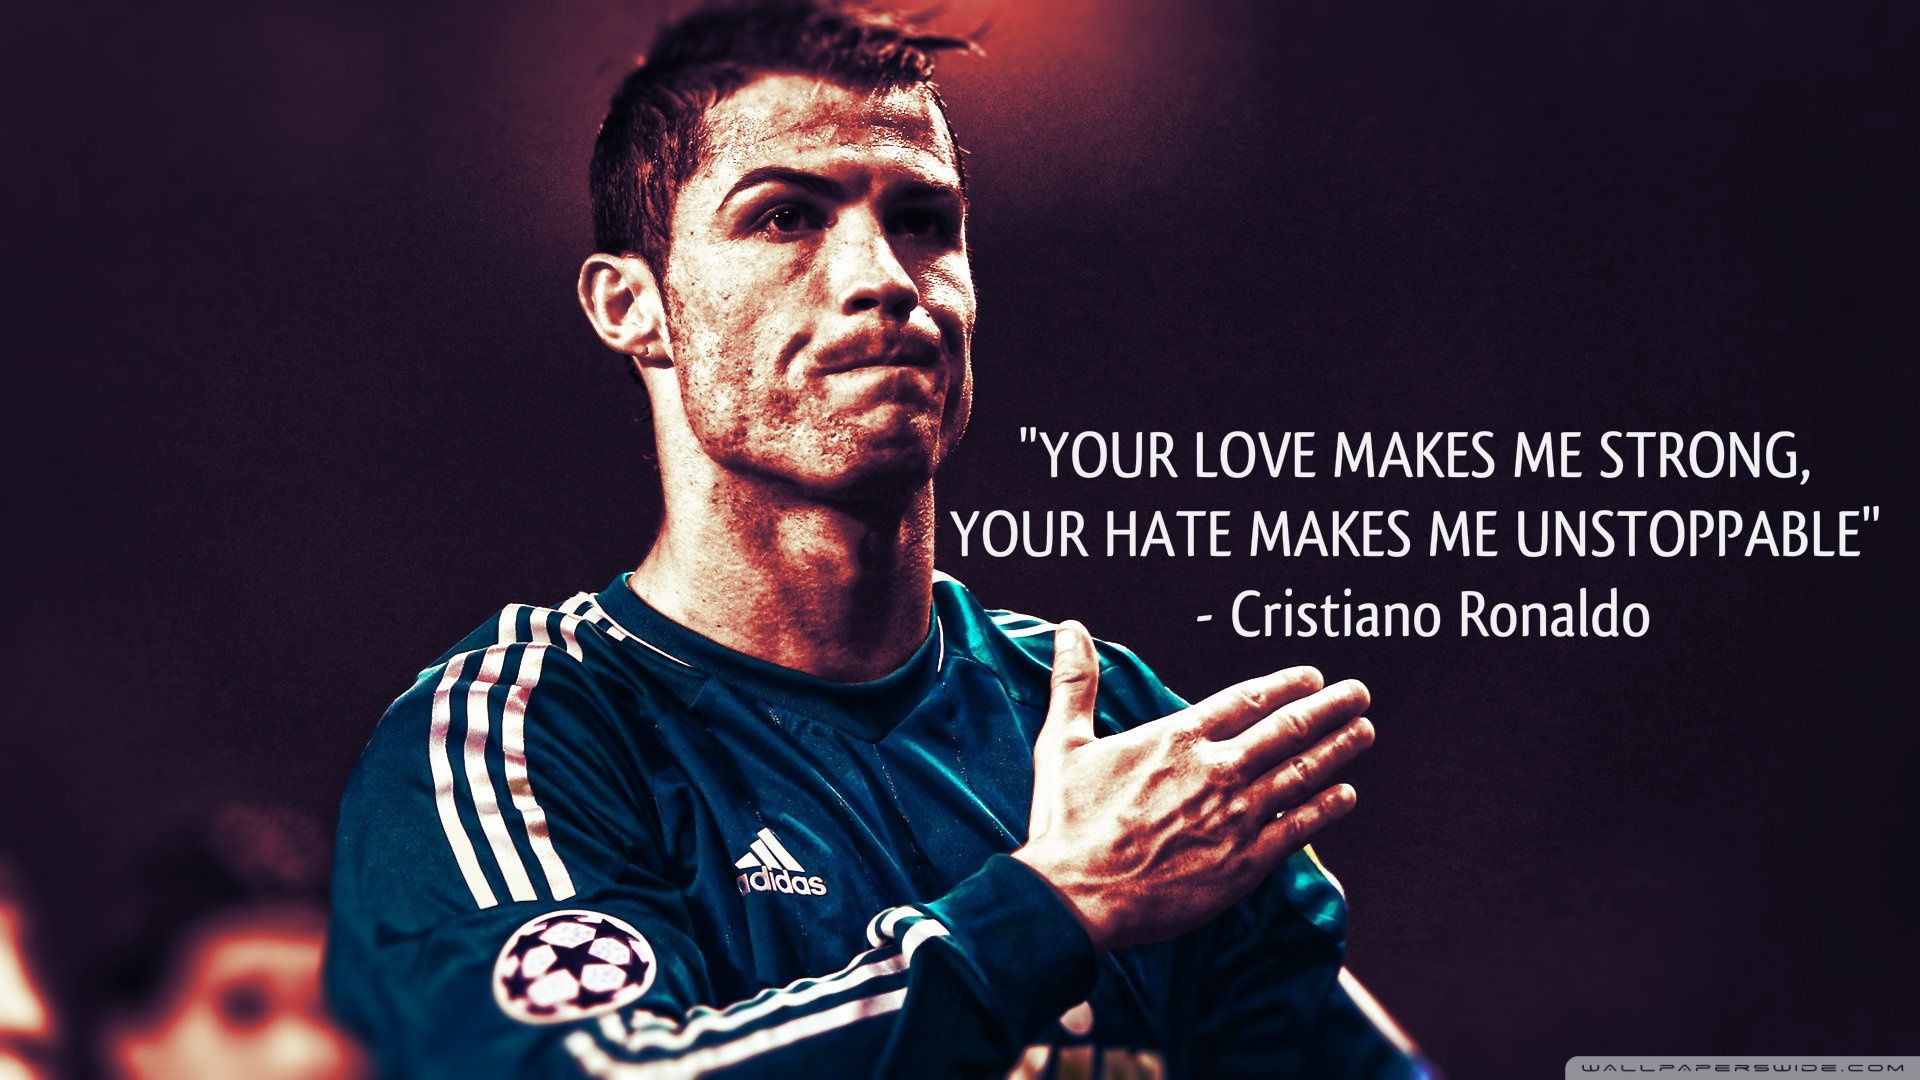 Cristiano Ronaldo Quote Ultra HD Desktop Backgrounds Wallpapers for